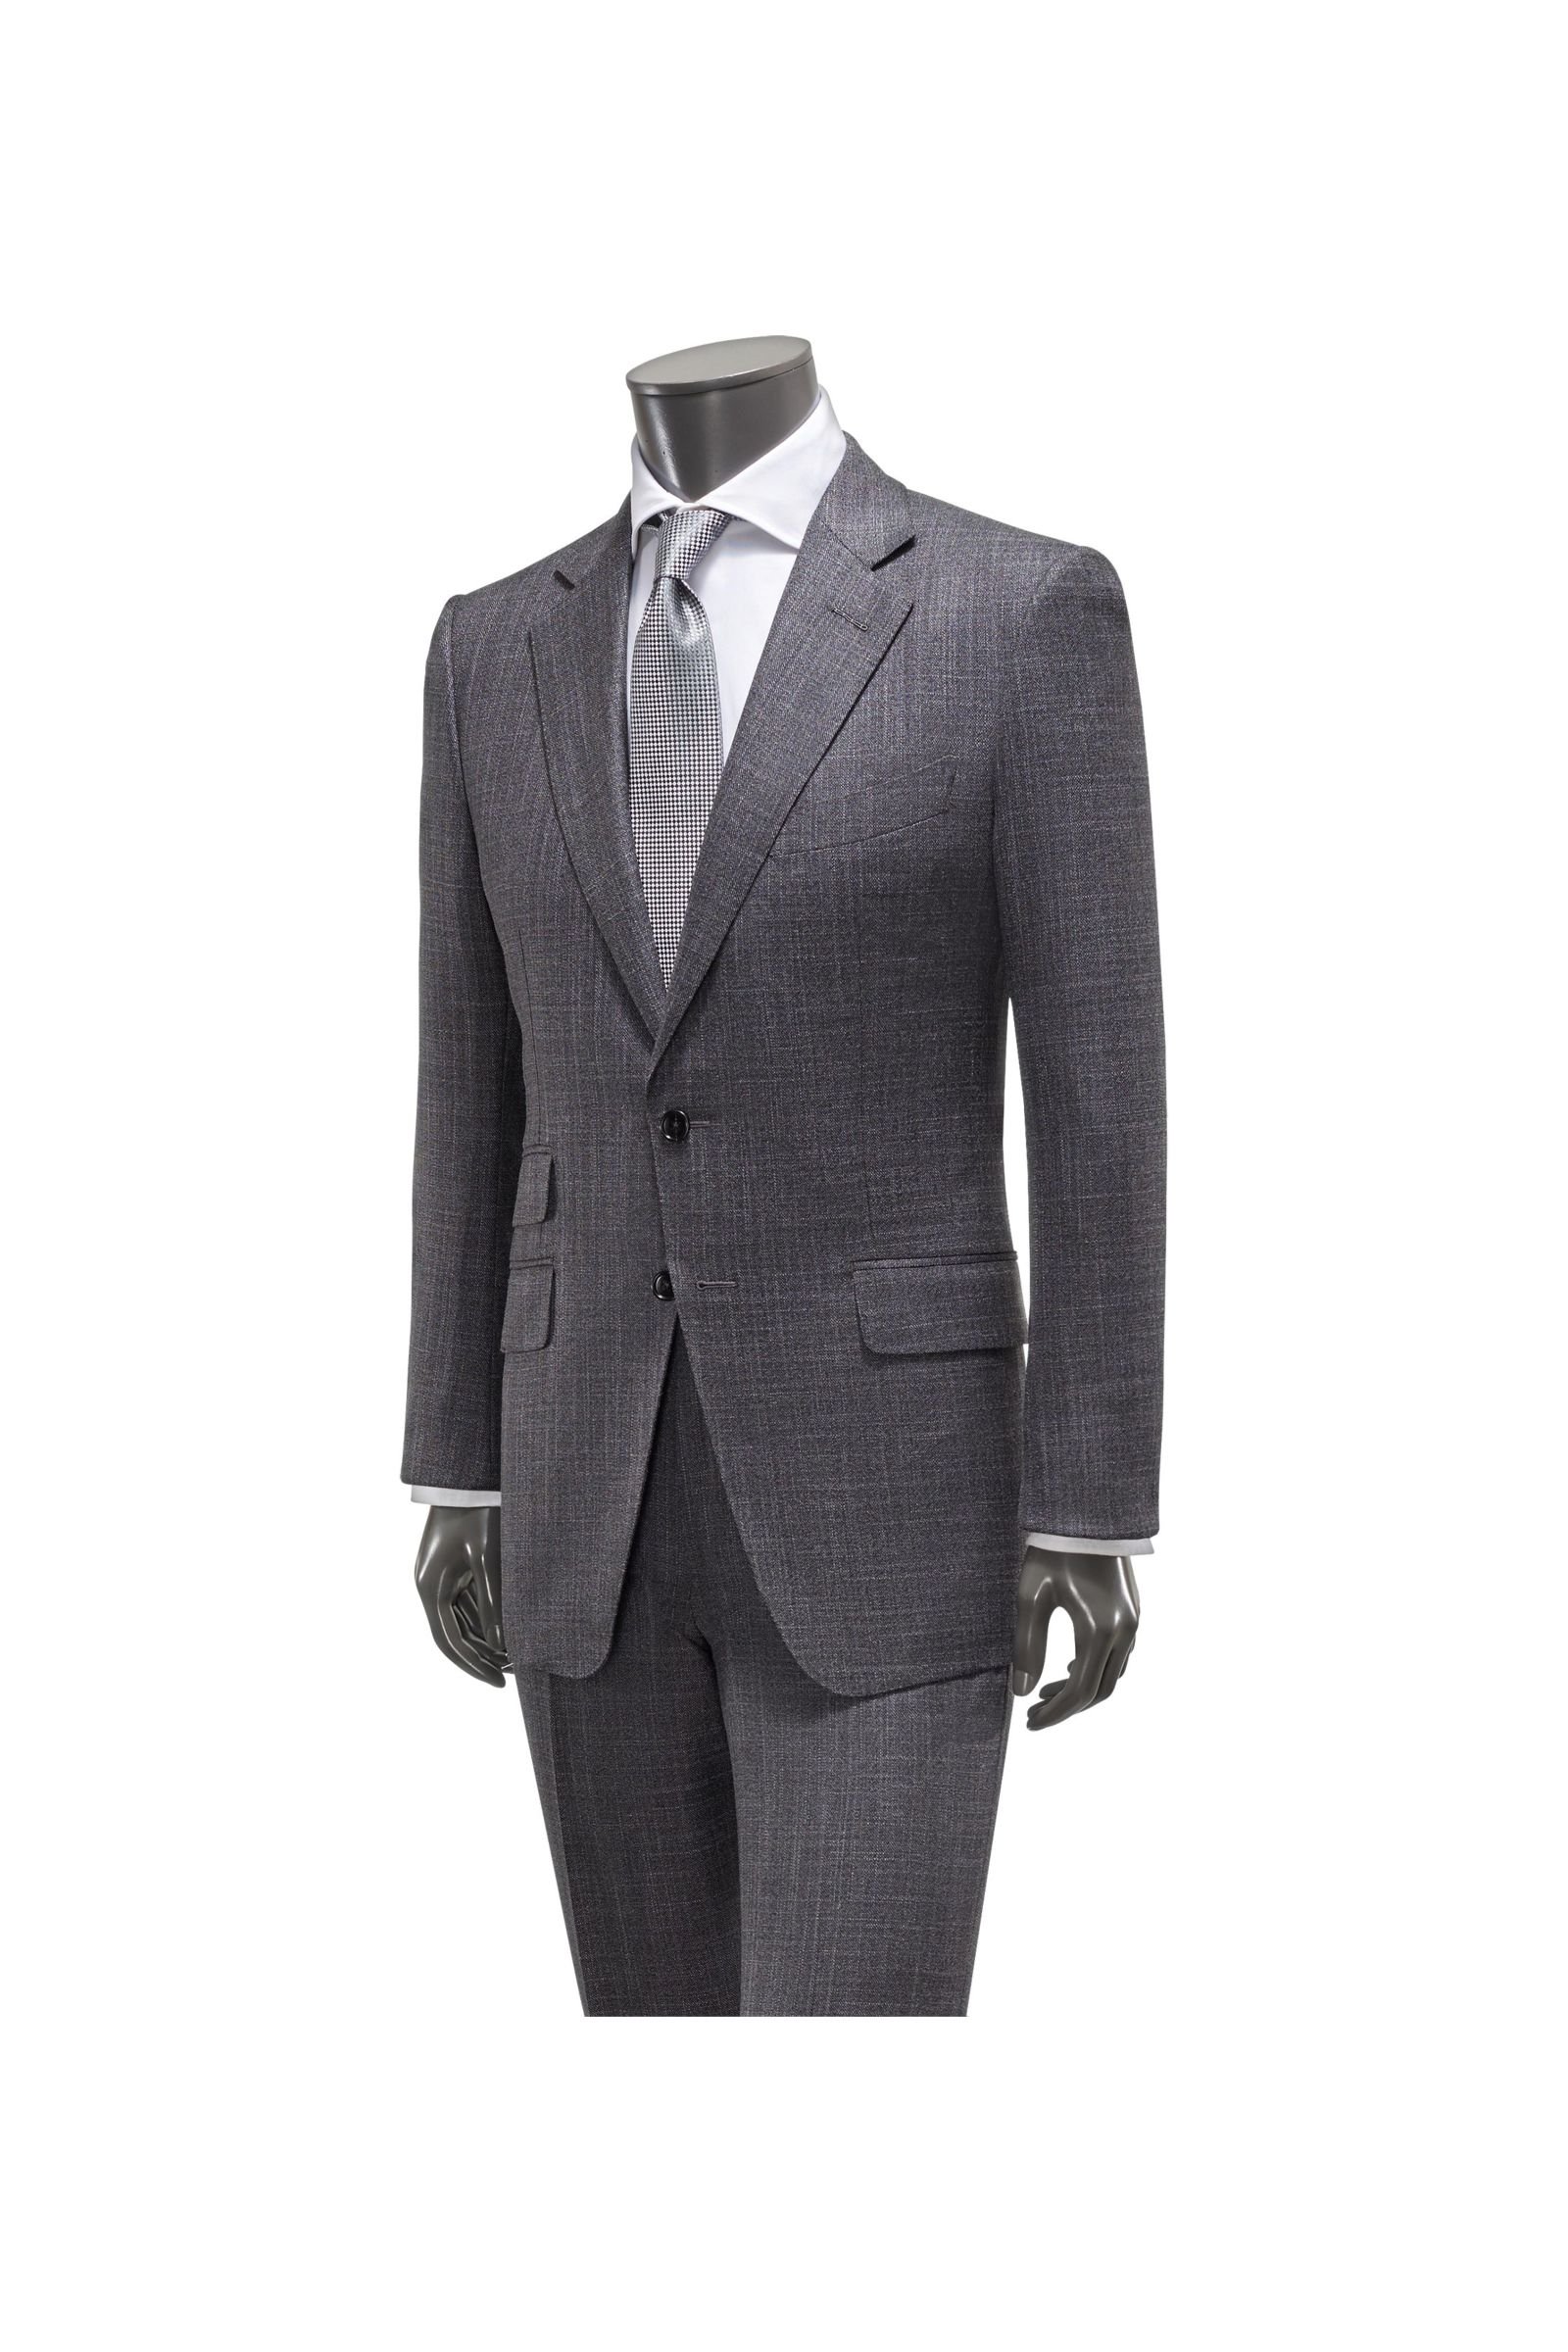 Suit 'O'Connor' dark grey patterned